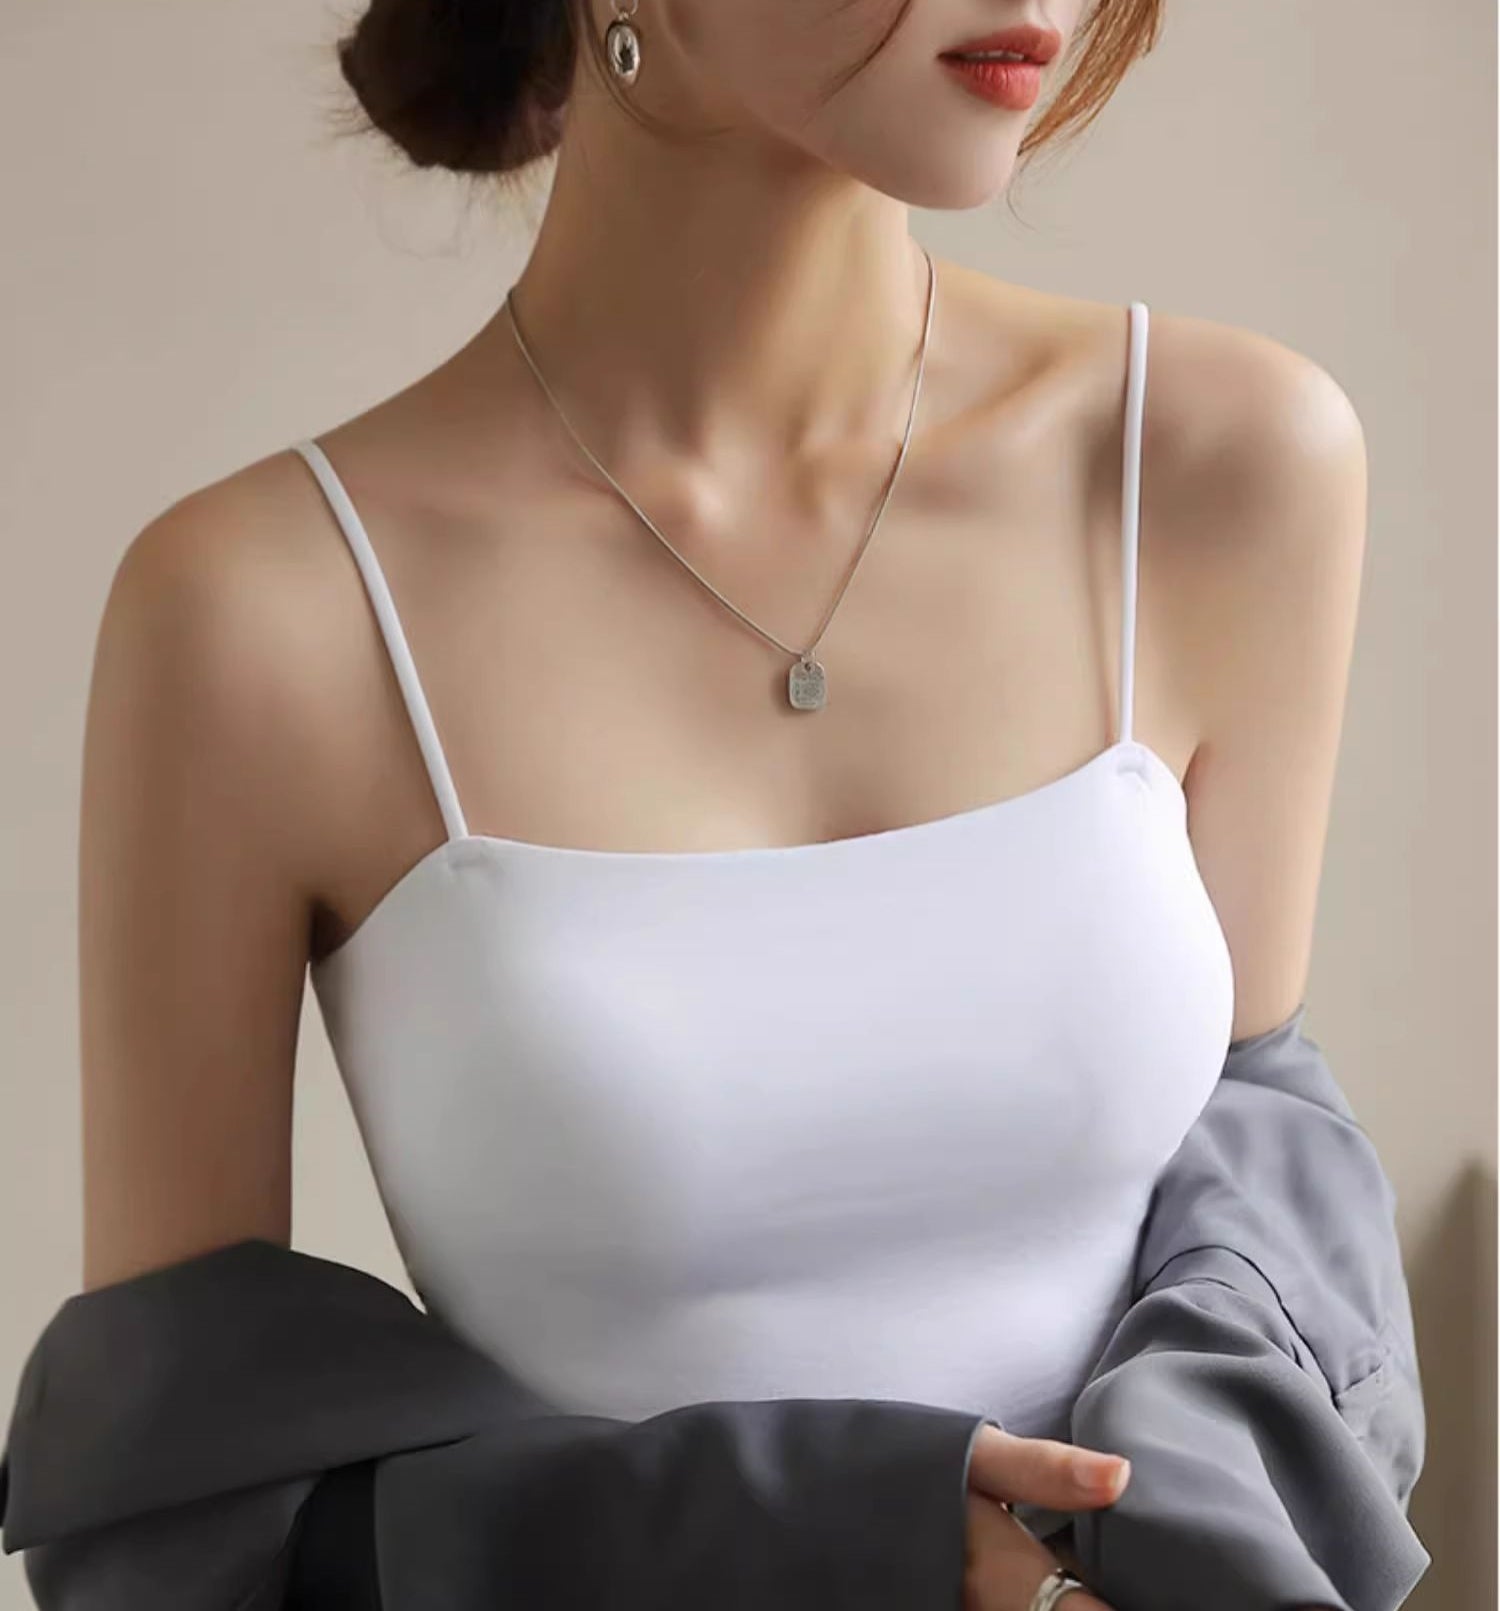 U-Cup Backless Body Shaping Camisole